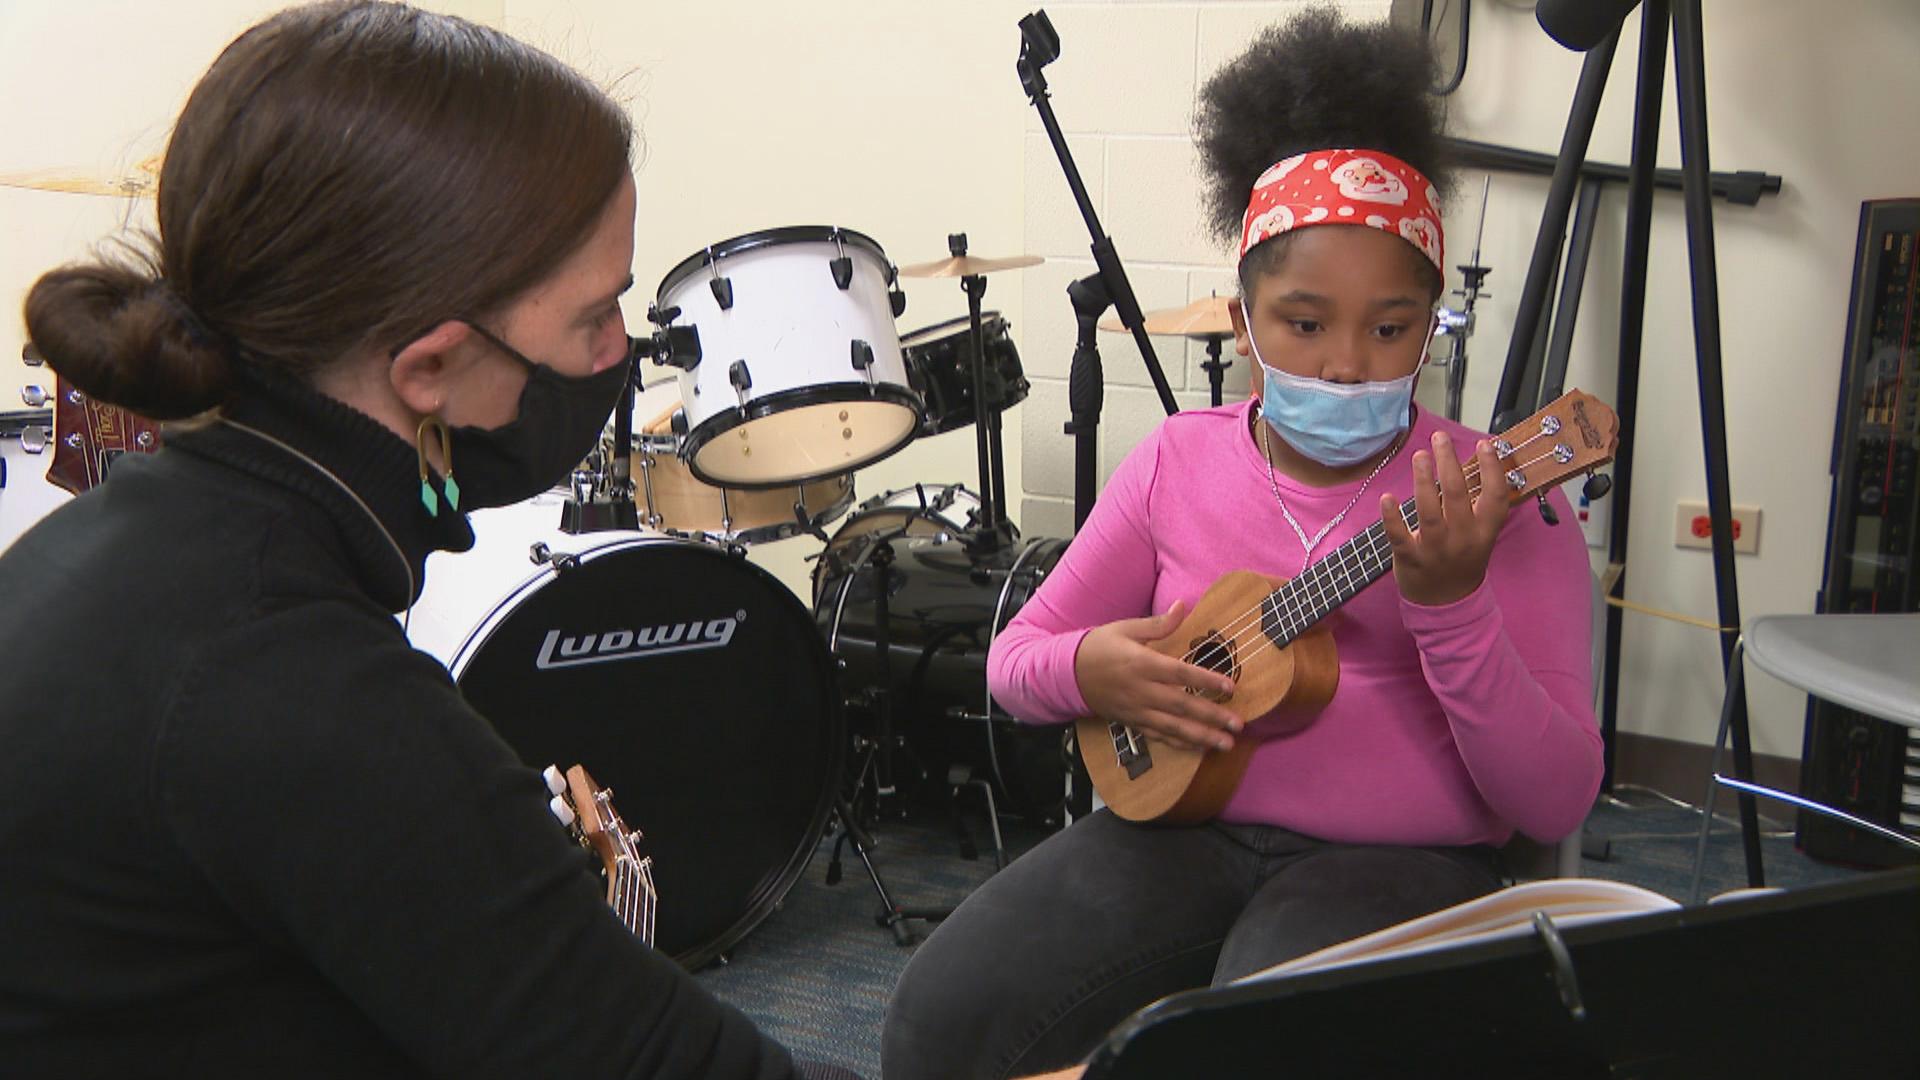 BandWith founder Anna Palomino, left, instructs 10-year-old Arviyanna Bell during a ukulele lesson at Marillac St. Vincent Family Services in East Garfield Park on Oct. 15, 2020. (WTTW News)